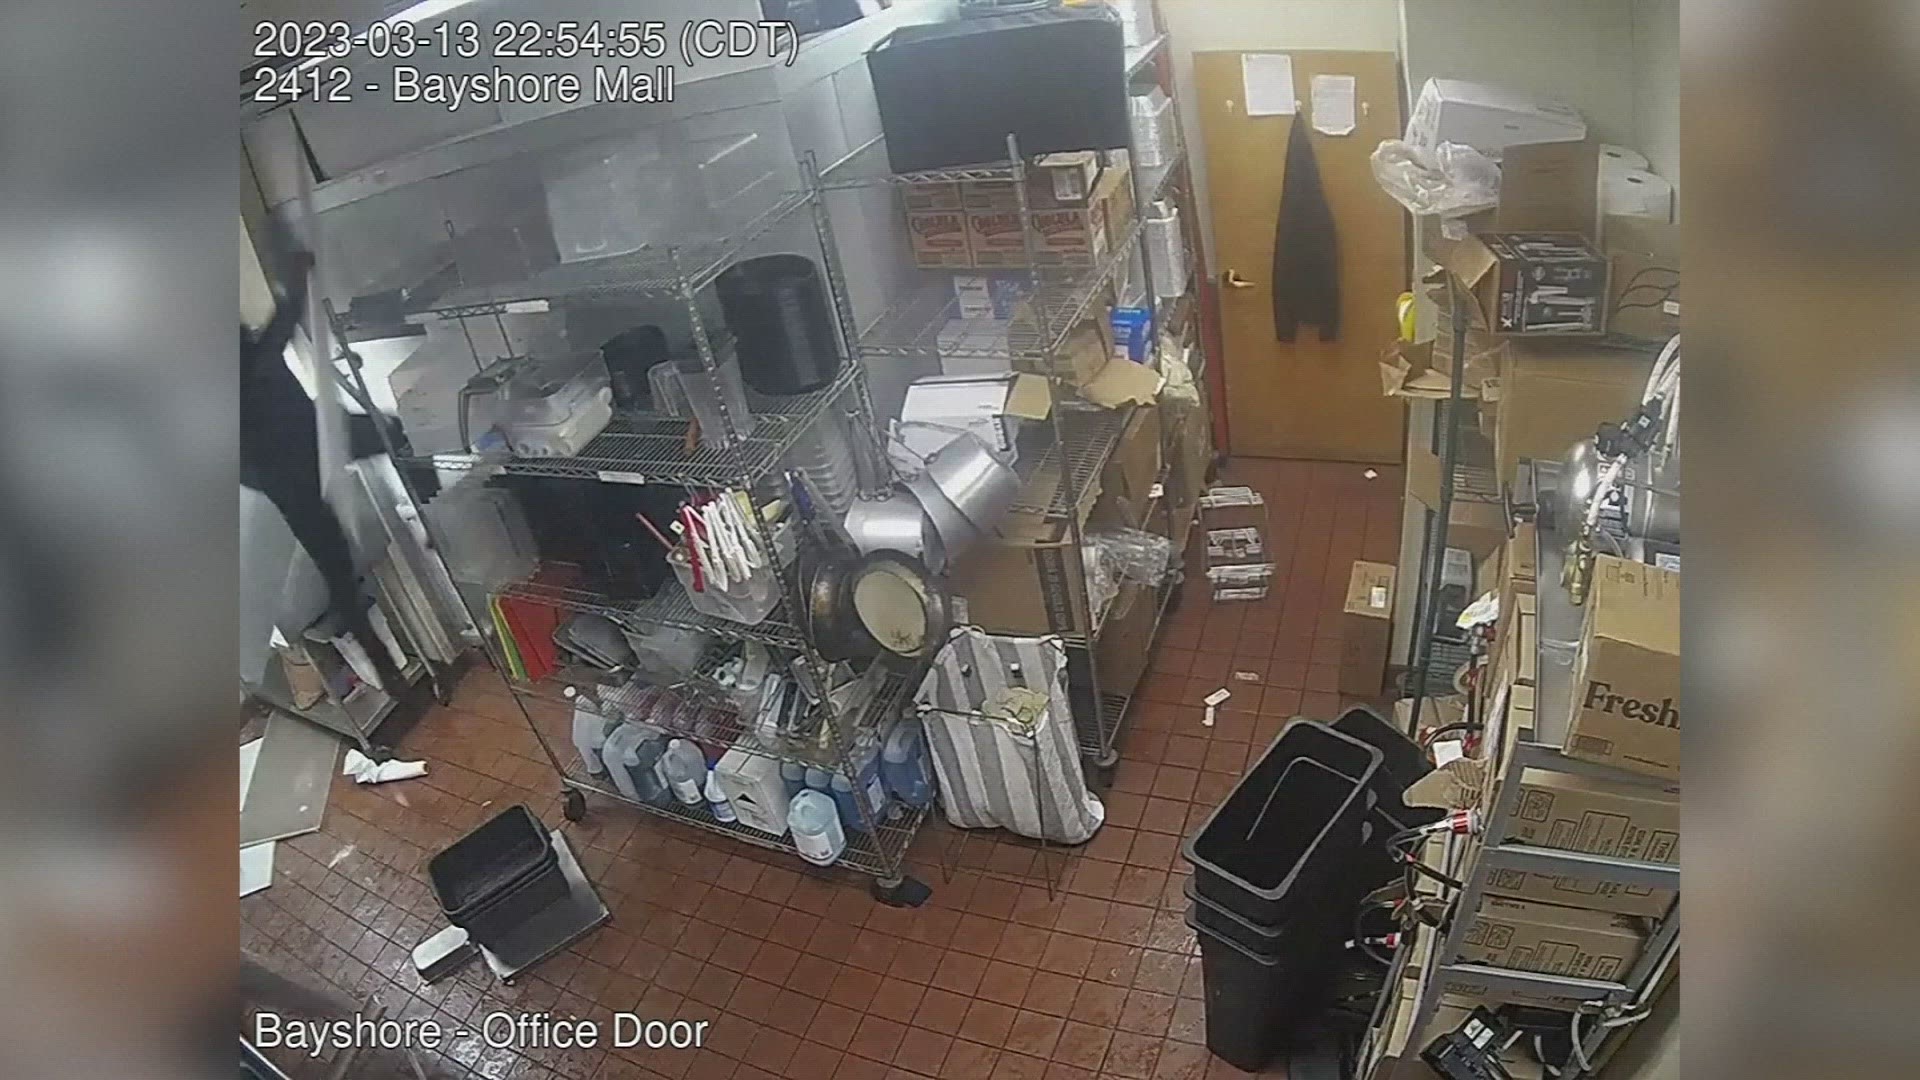 Two suspects were arrested in an attempted armed robbery of a Qdoba restaurant in Glendale, Wisconsin. Surveillance video shows them falling through the ceiling.